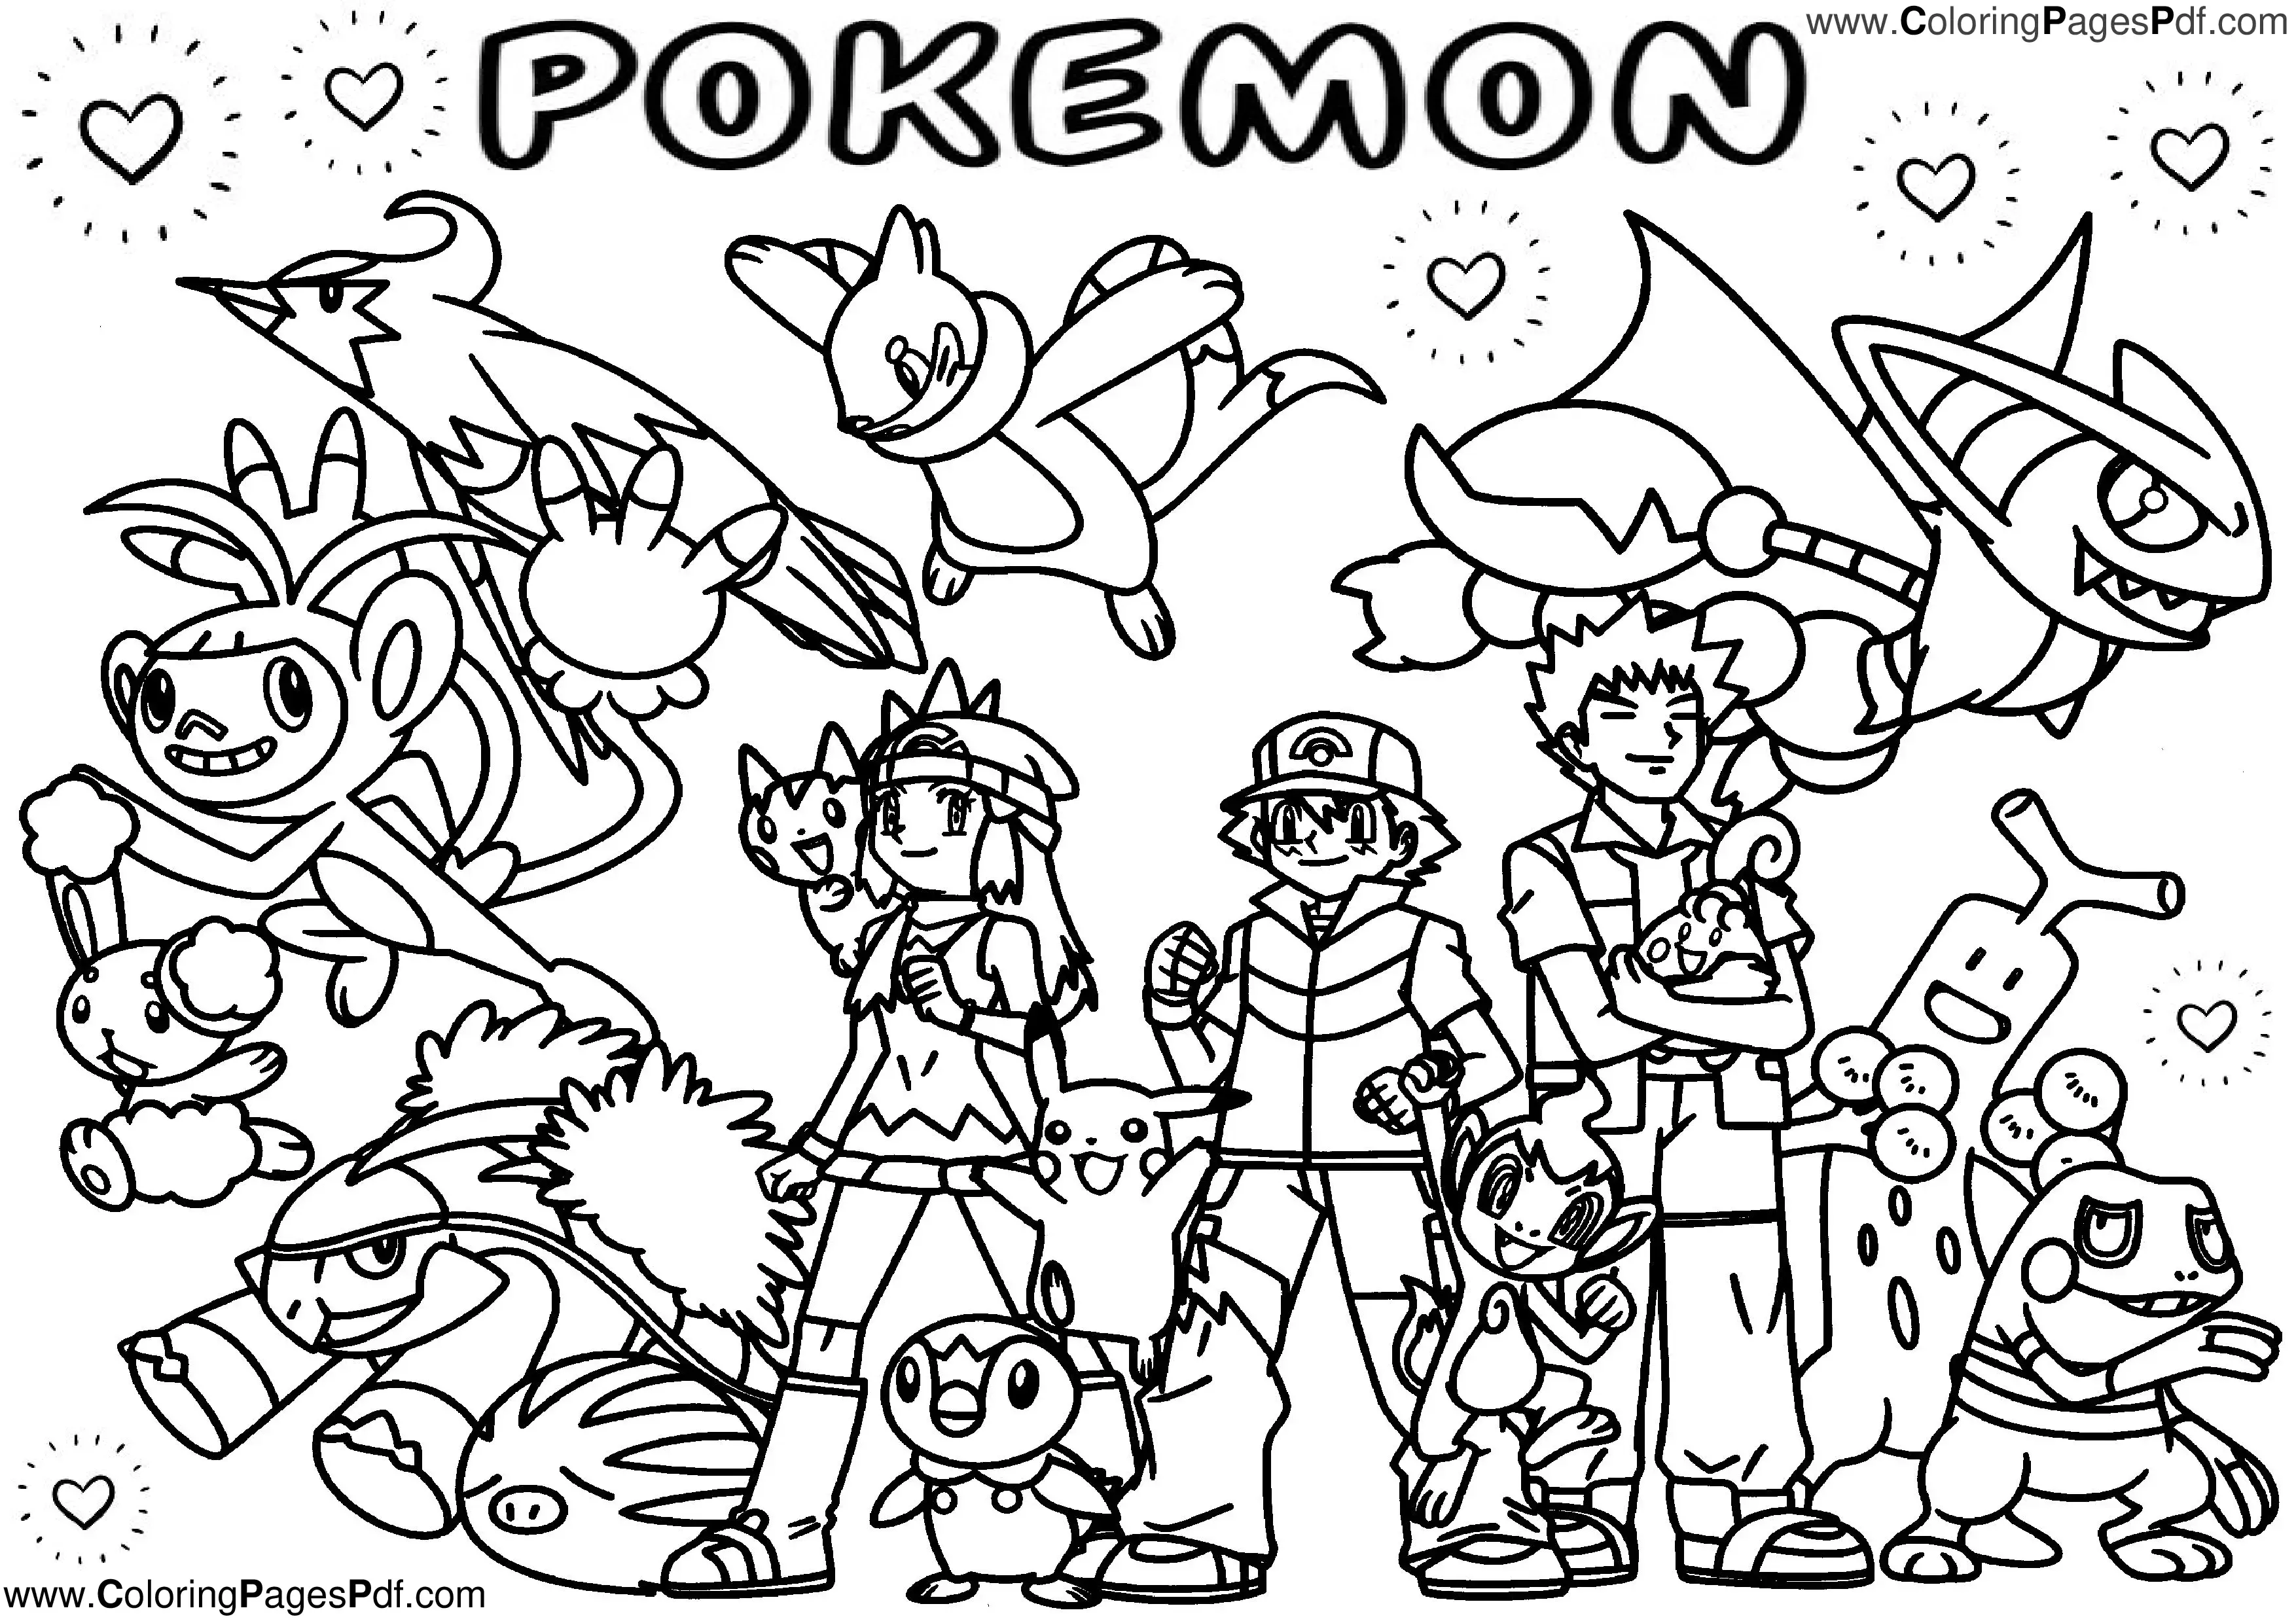 Pokemon coloring pages for adults